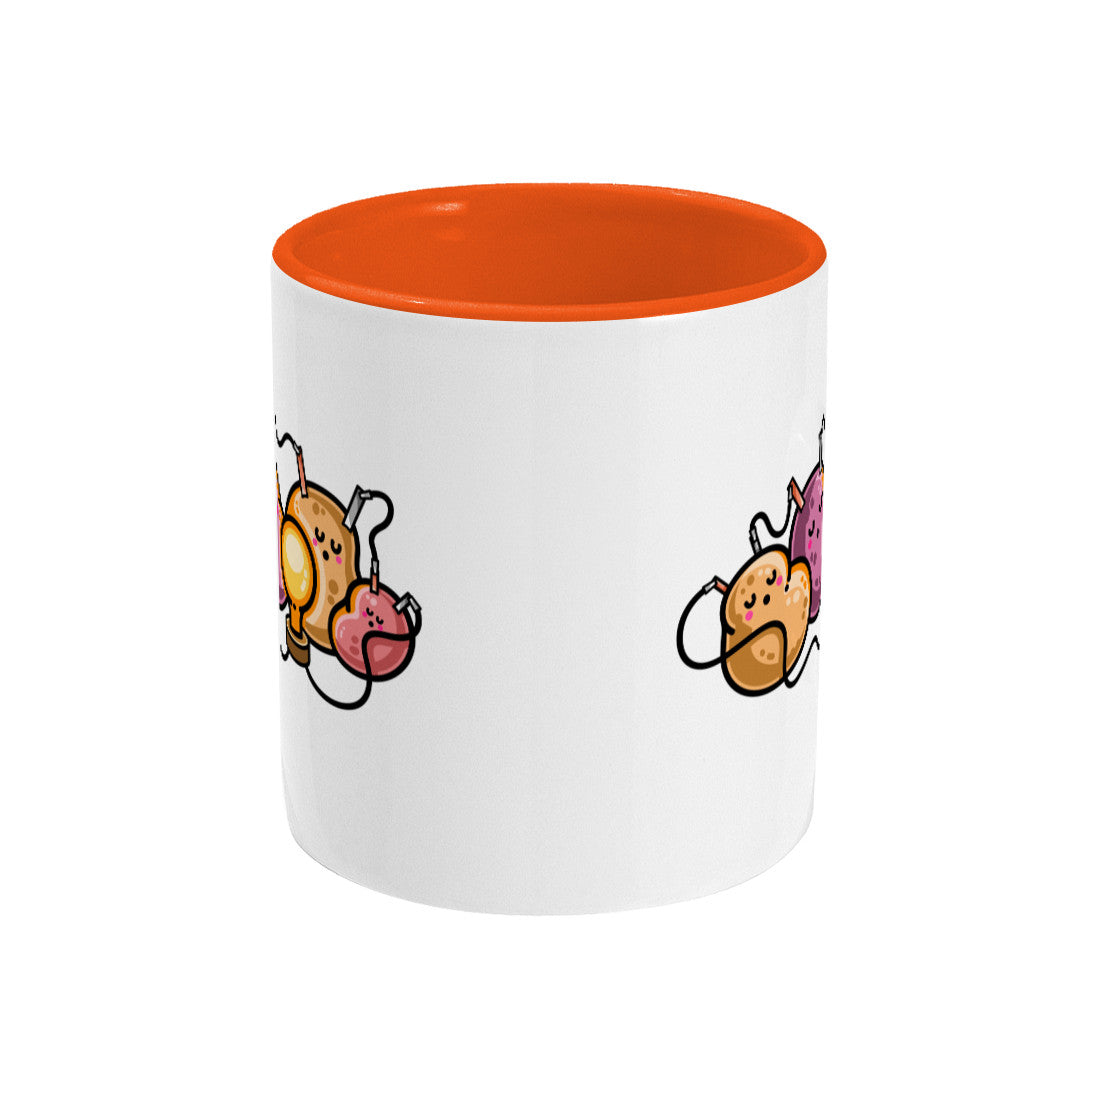 A two-toned white and orange ceramic mug, side view with handle around the back, the edges of the front and back designs showing